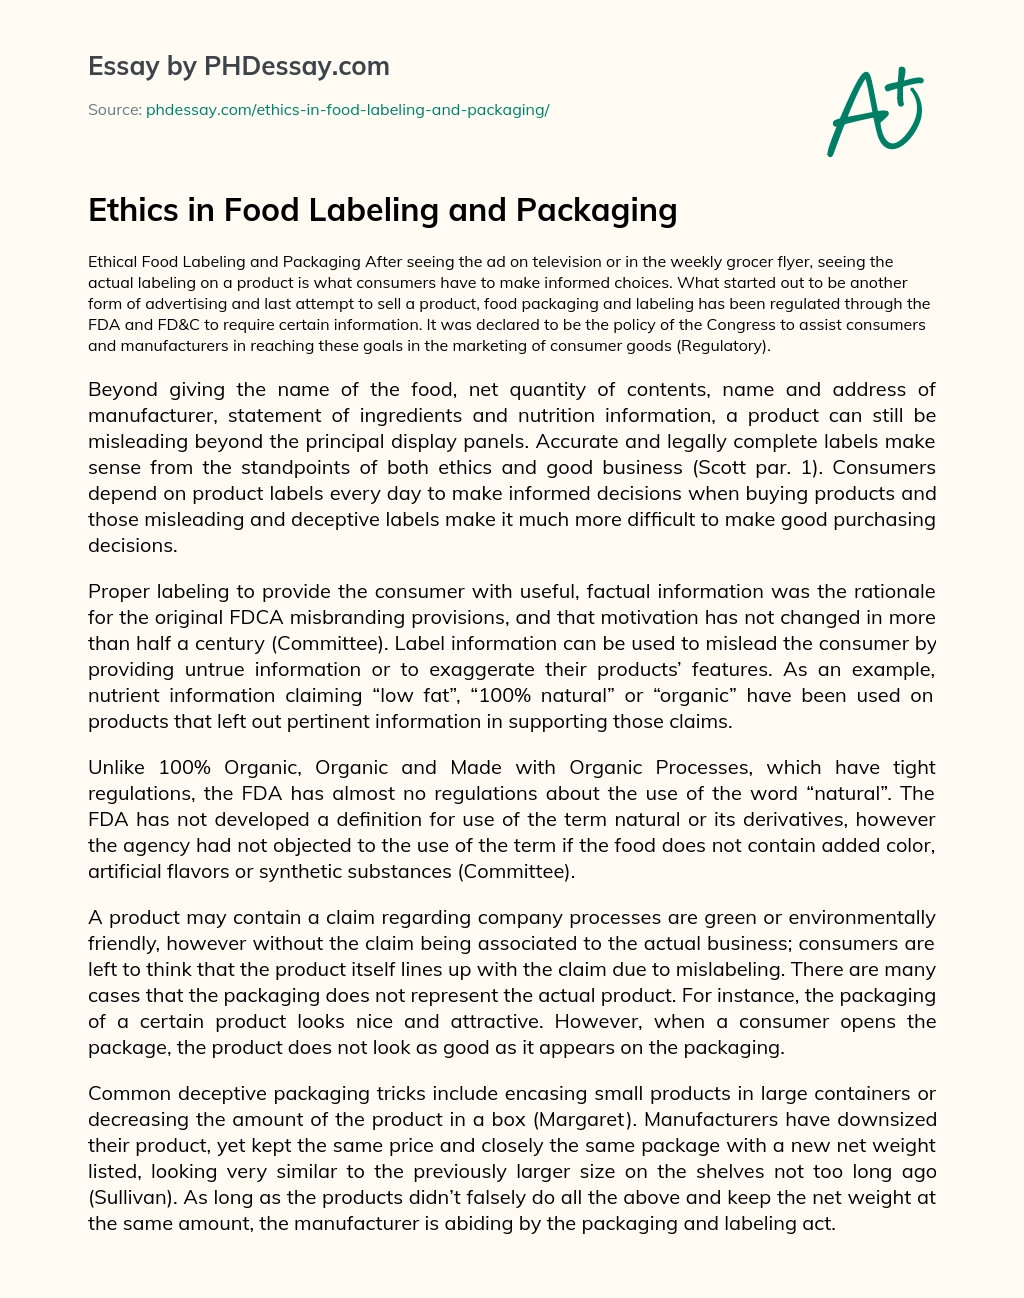 Ethics in Food Labeling and Packaging essay